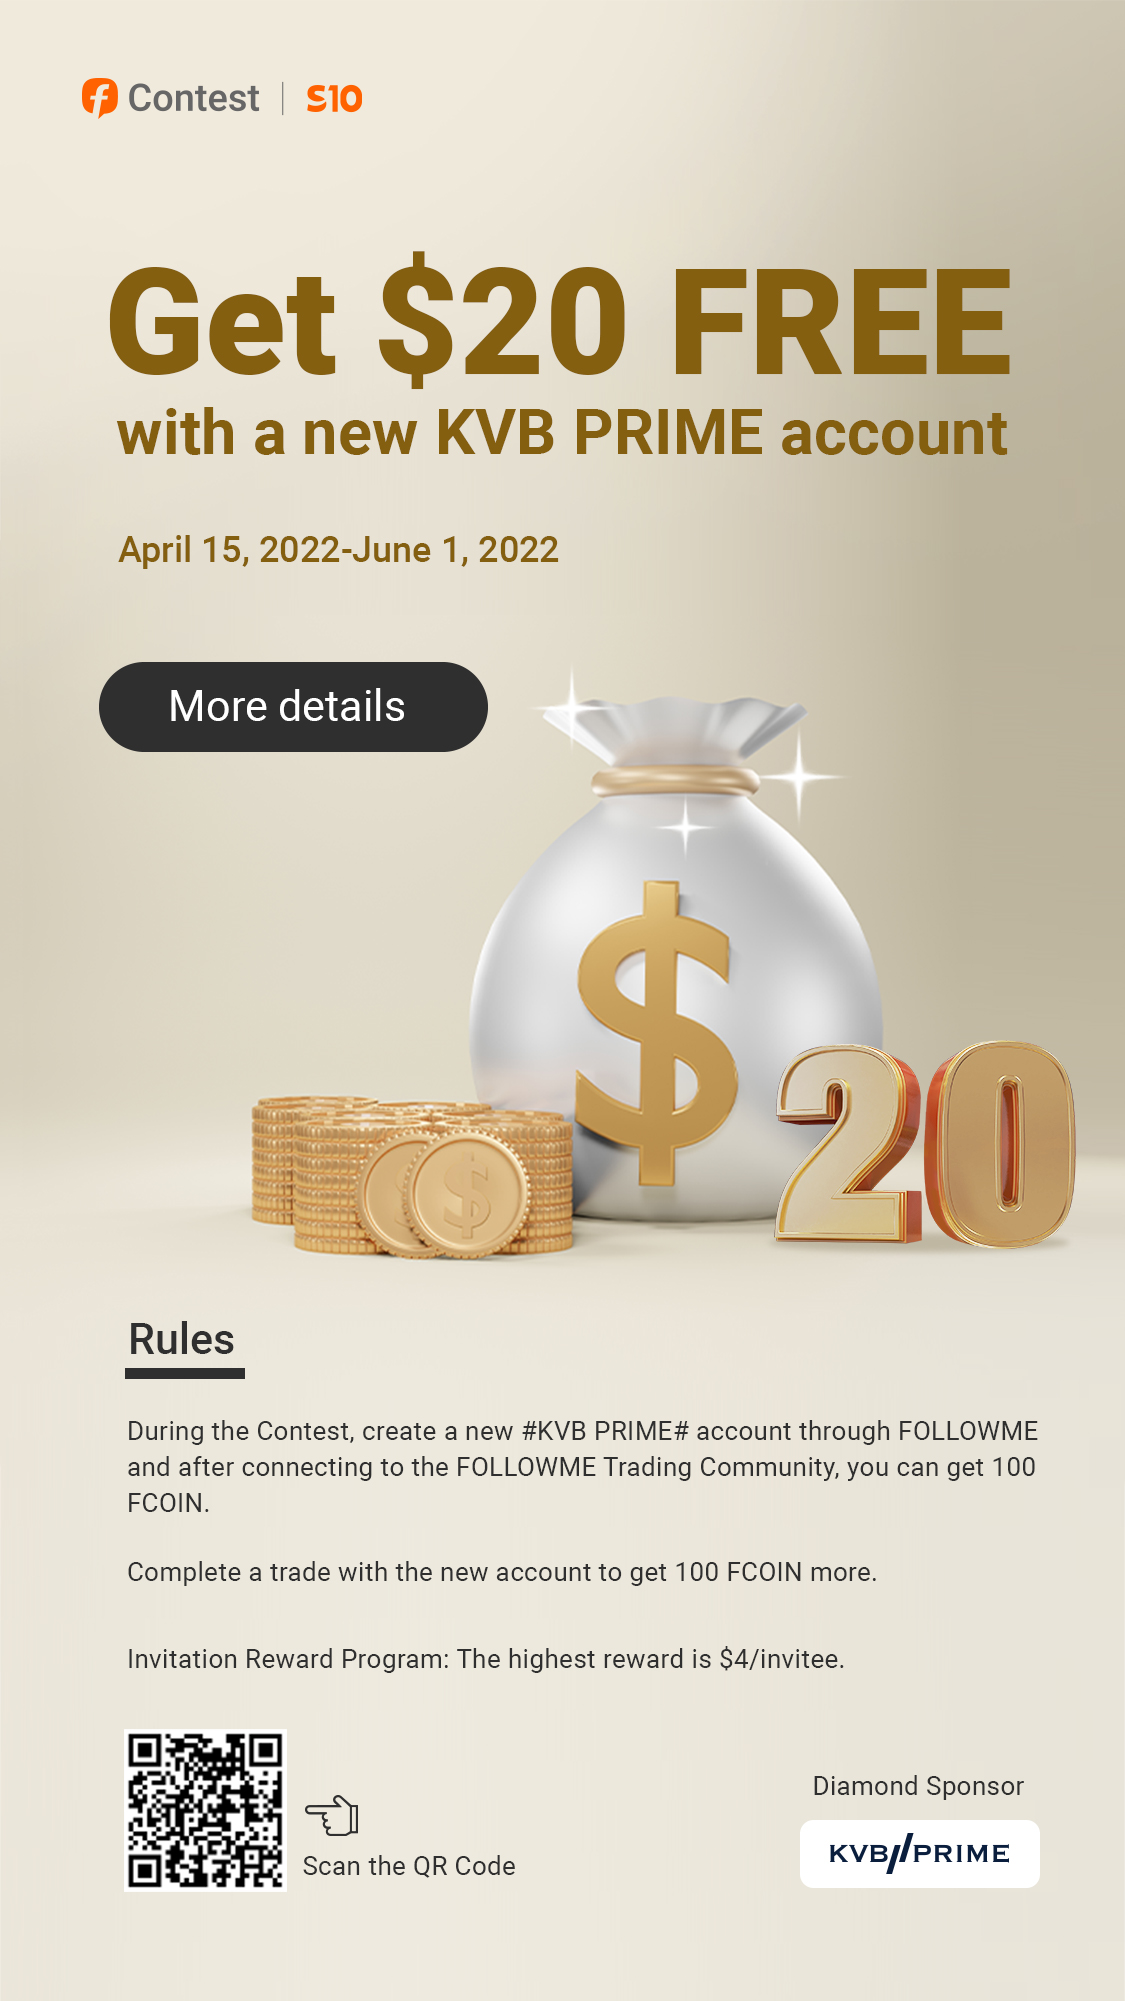 Use a KVB PRIME account to join in the S10 Contest and get $20!